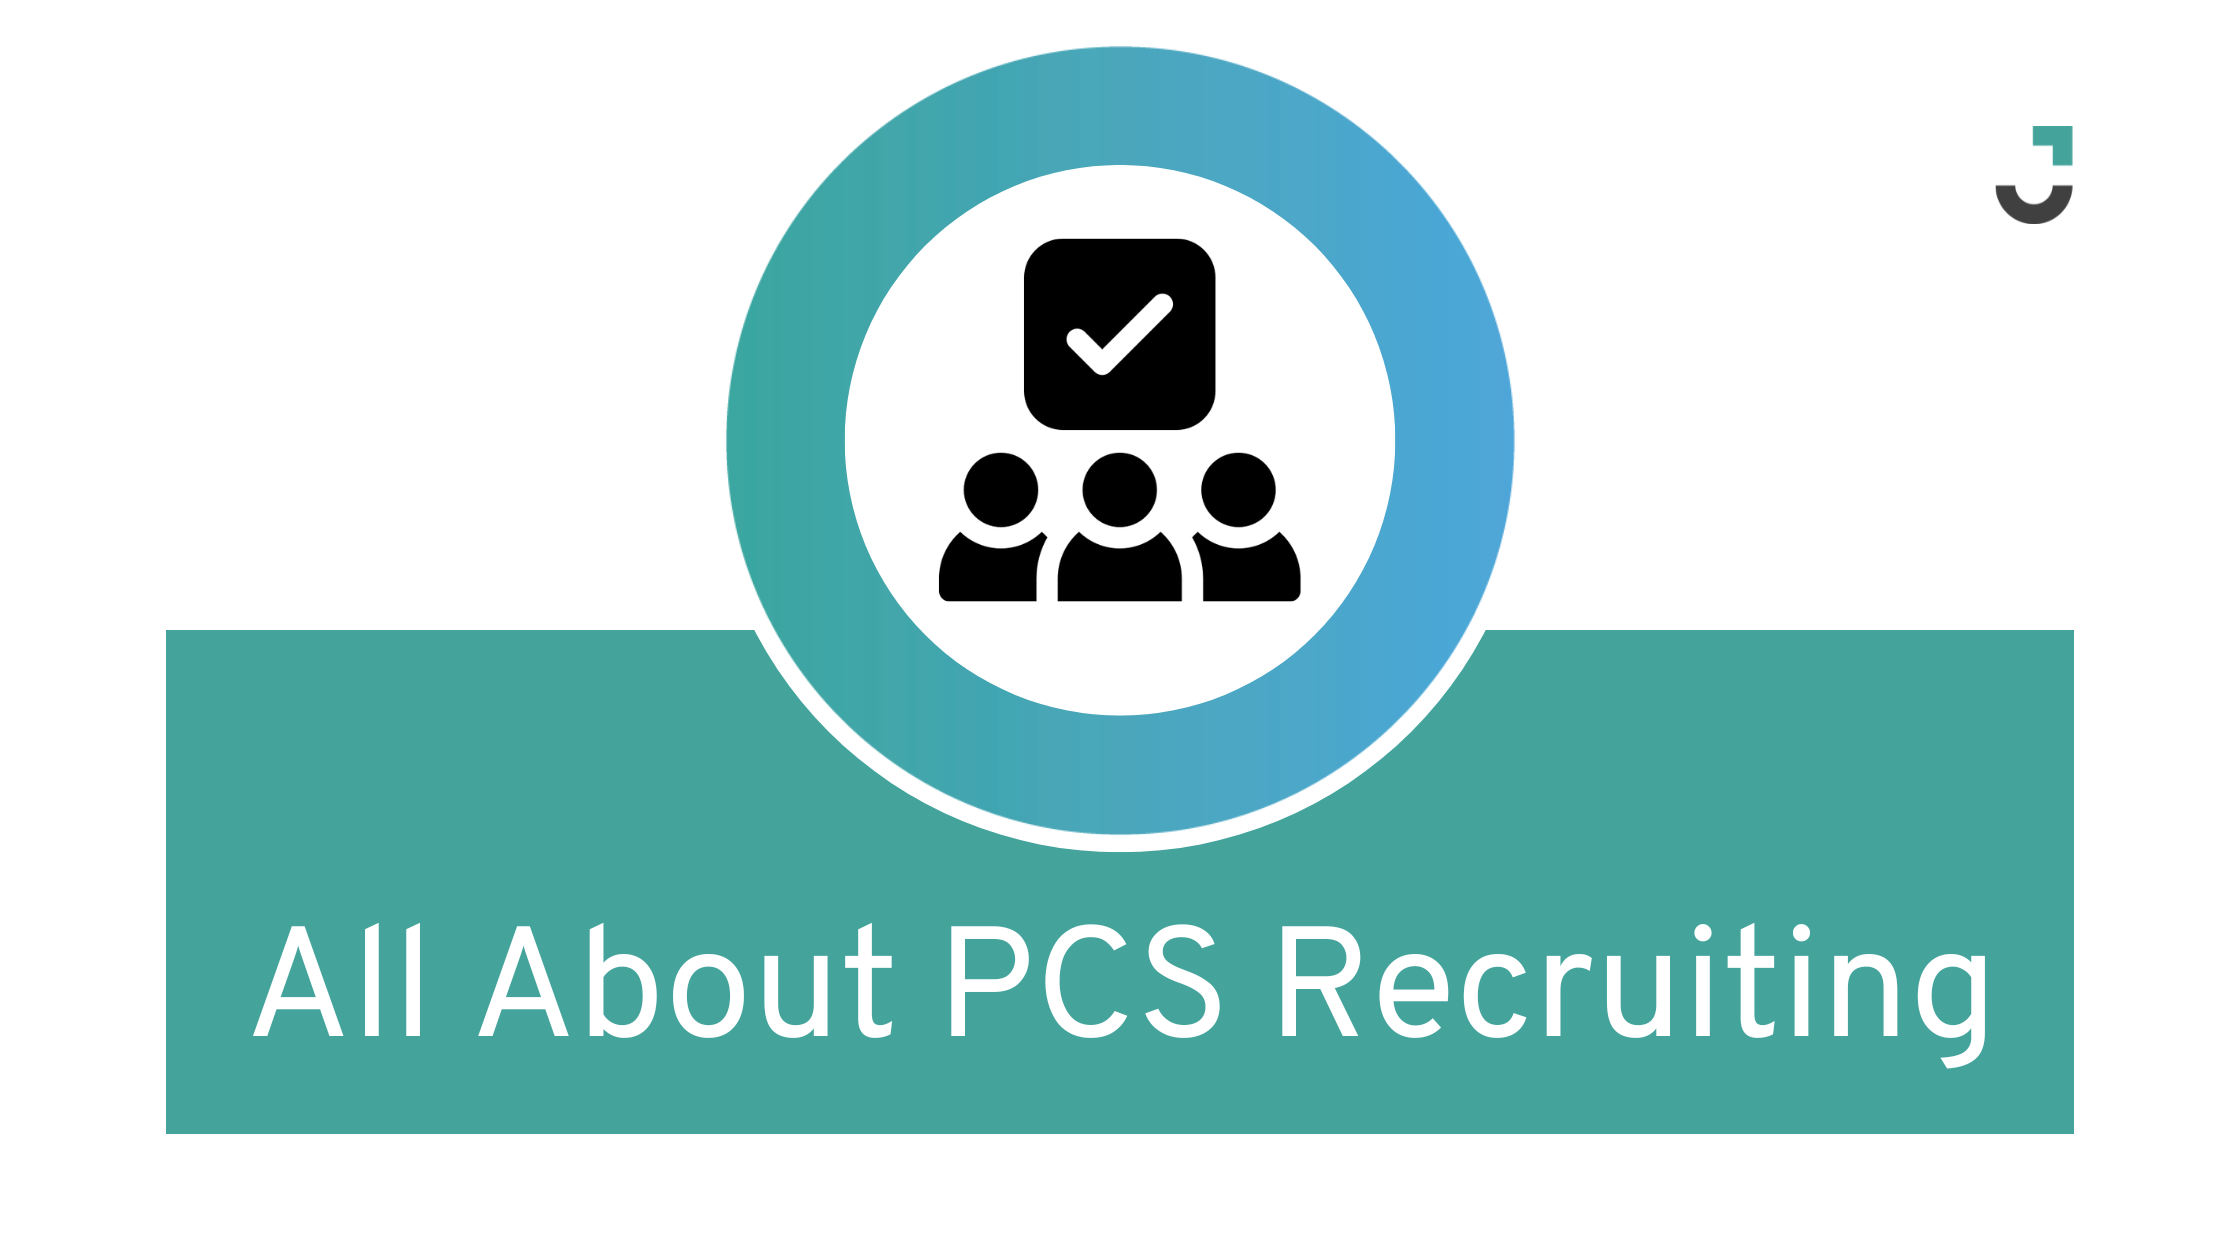 All About PCS Recruiting